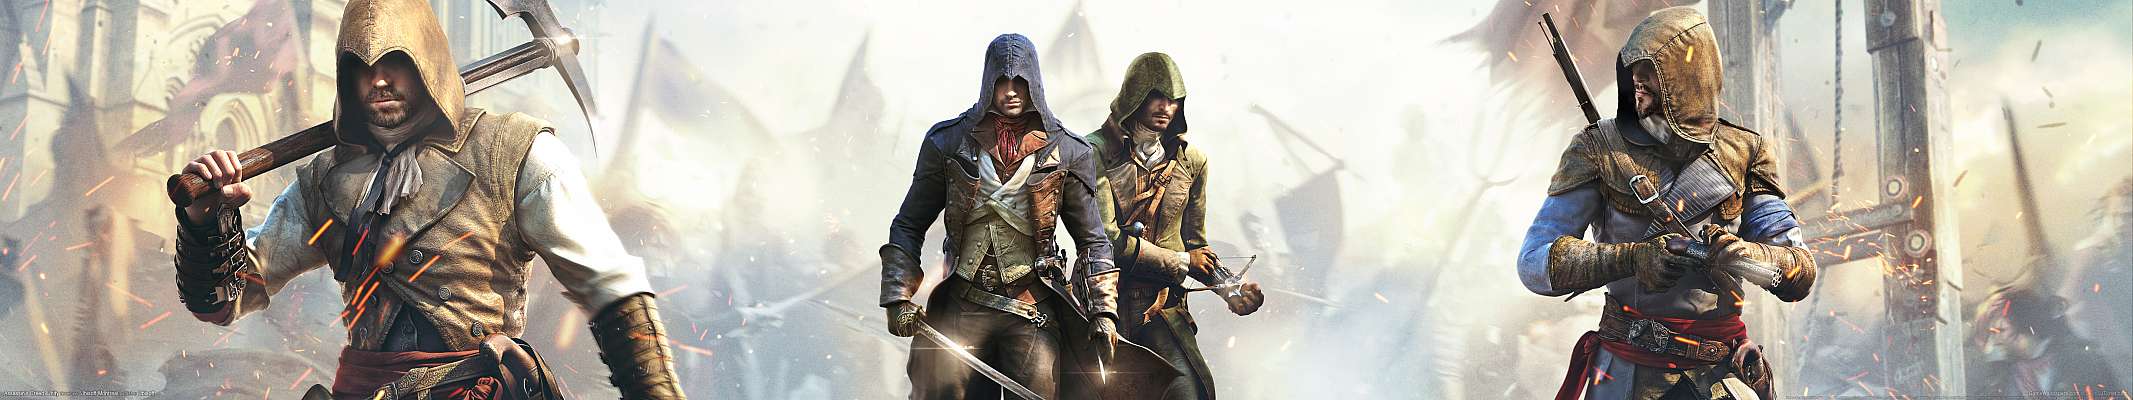 Assassin's Creed: Unity triple screen achtergrond